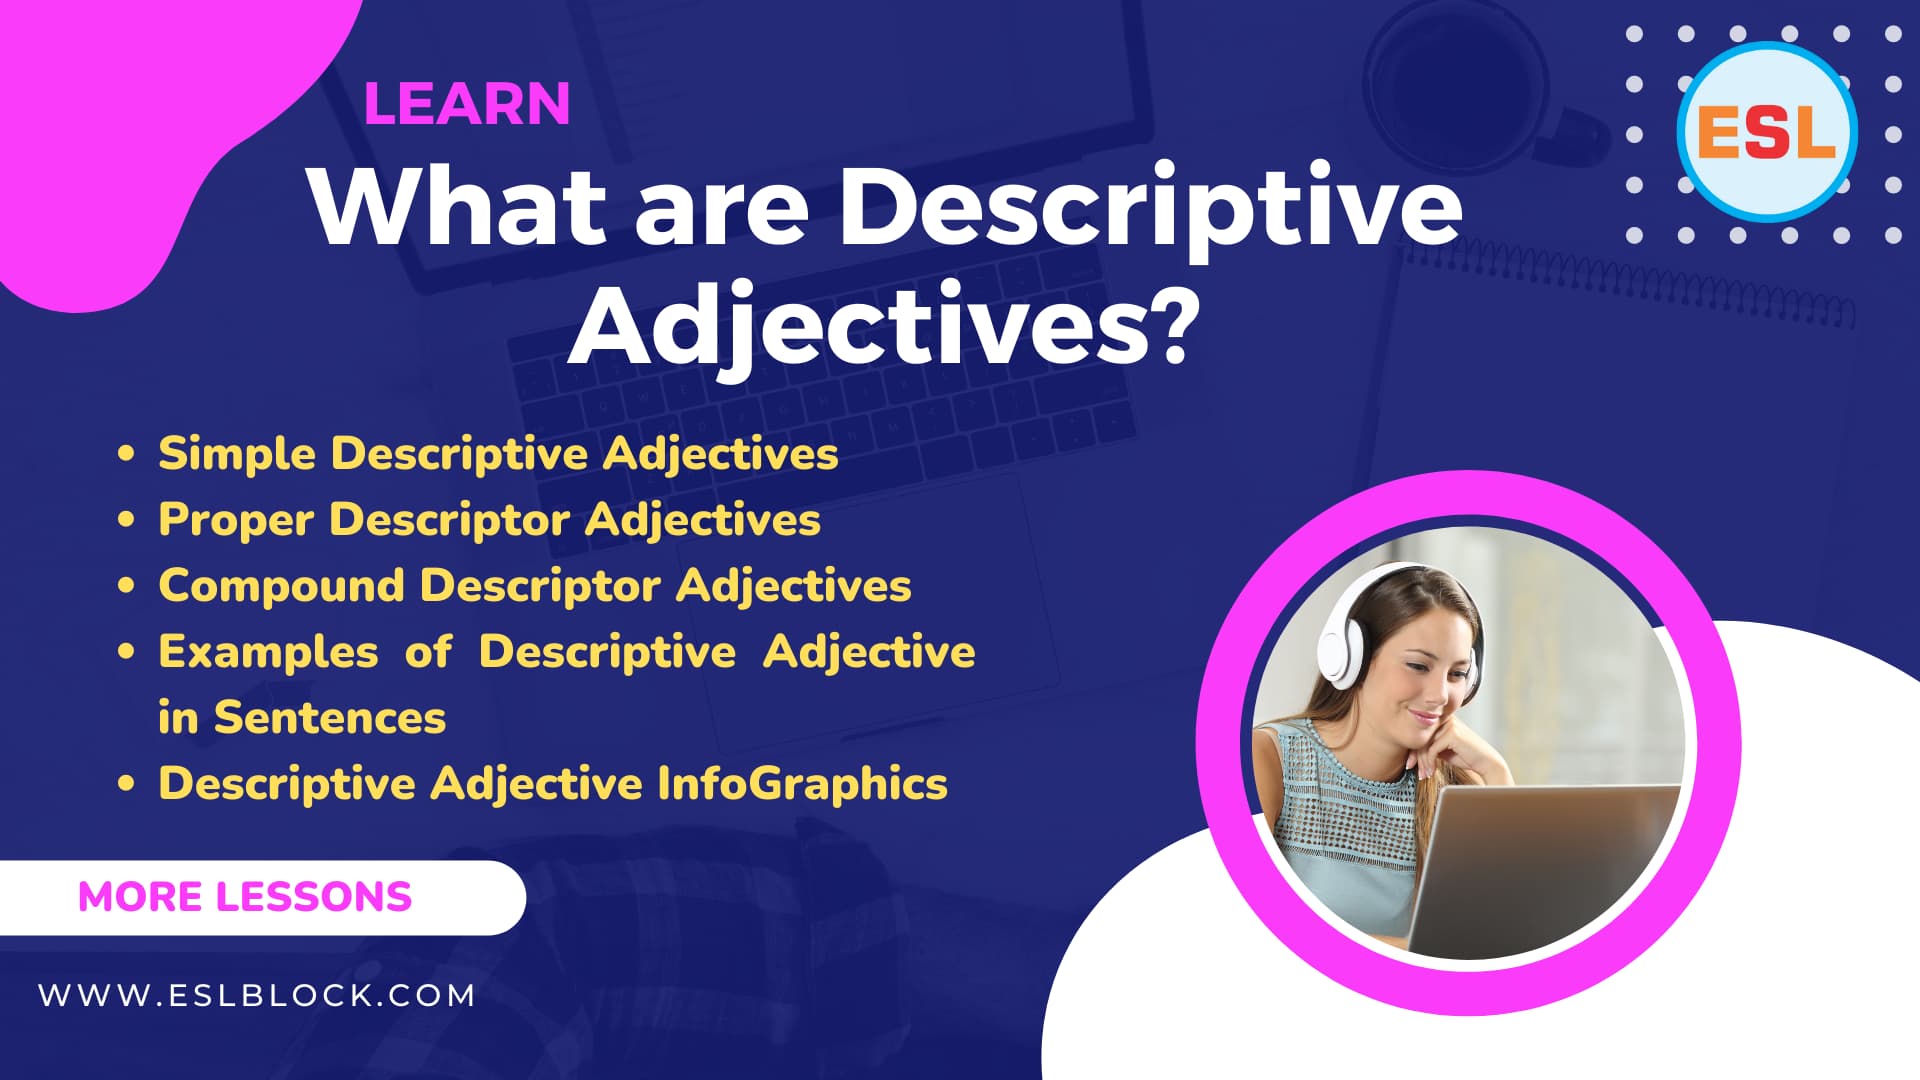 Adjective Words, Adjectives, Compound Descriptive Adjectives, Descriptive Adjectives, List of Descriptive Adjectives, List of Useful Descriptive Adjectives in English, Order of Descriptive Adjectives, Proper Descriptive Adjectives, Simple Descriptive Adjectives, What are Descriptive Adjectives